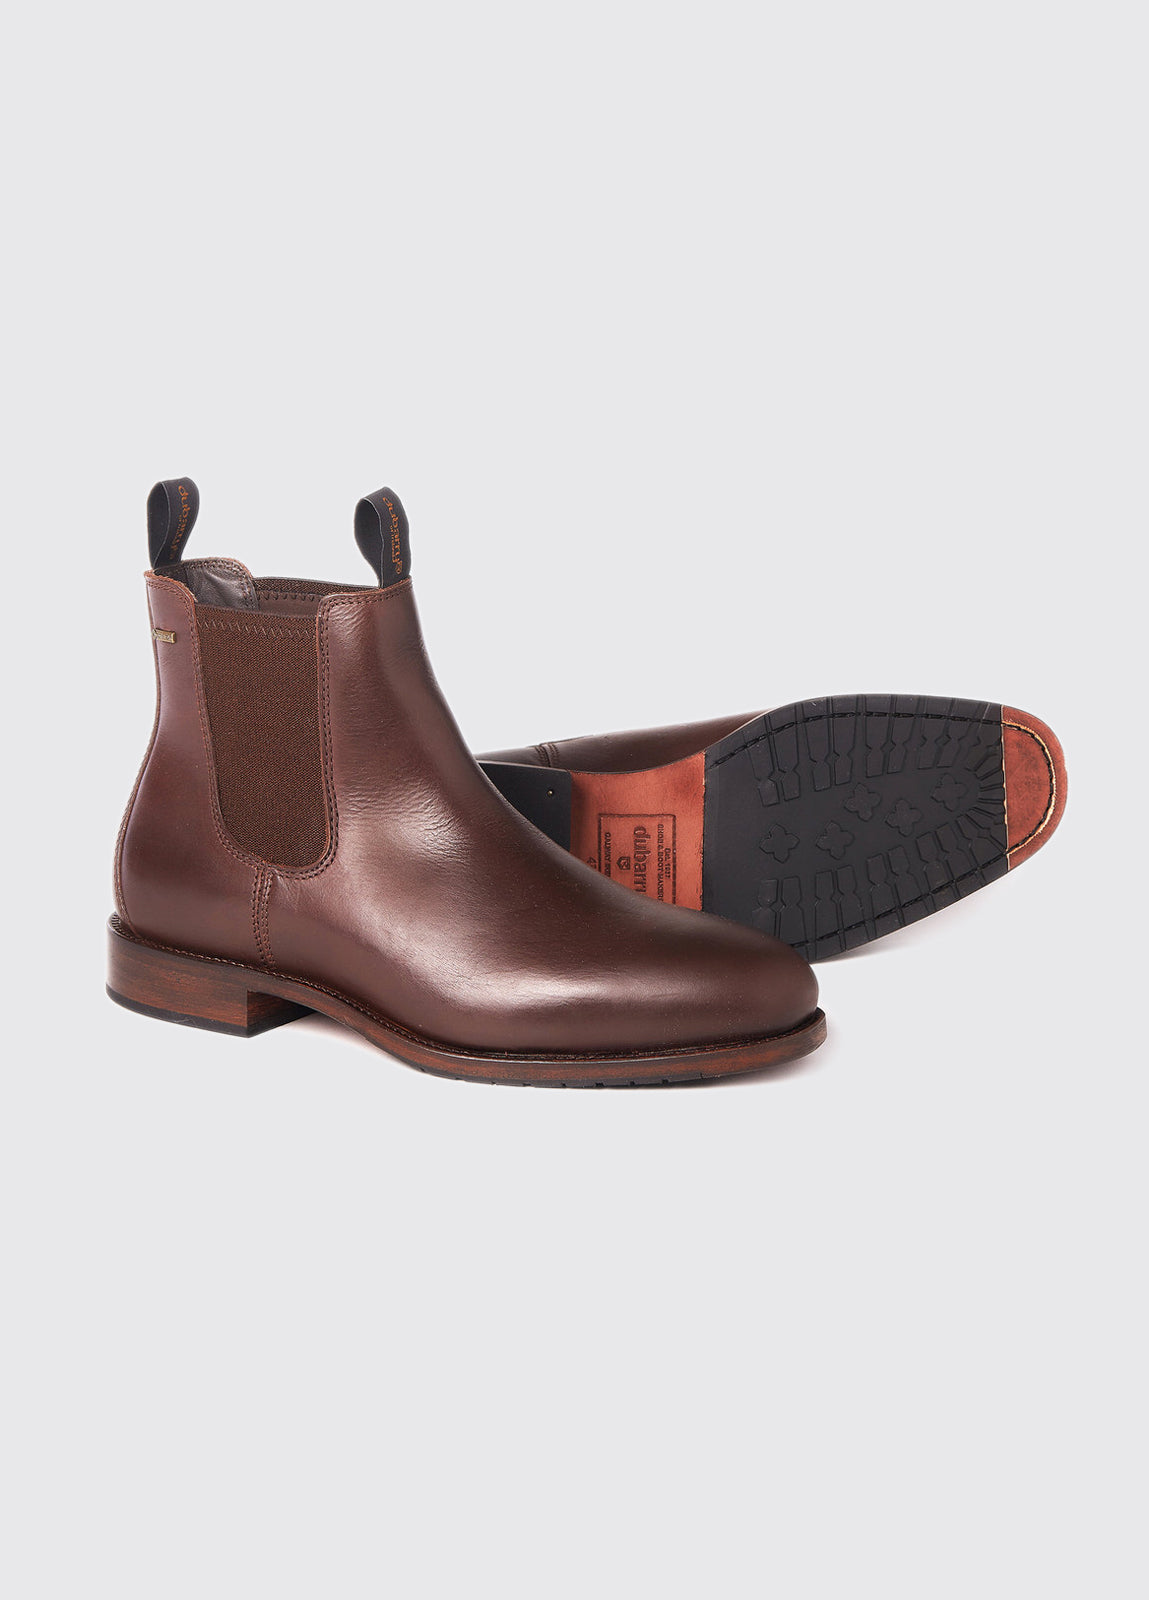 Kerry Leather Soled Boot - Mahogany